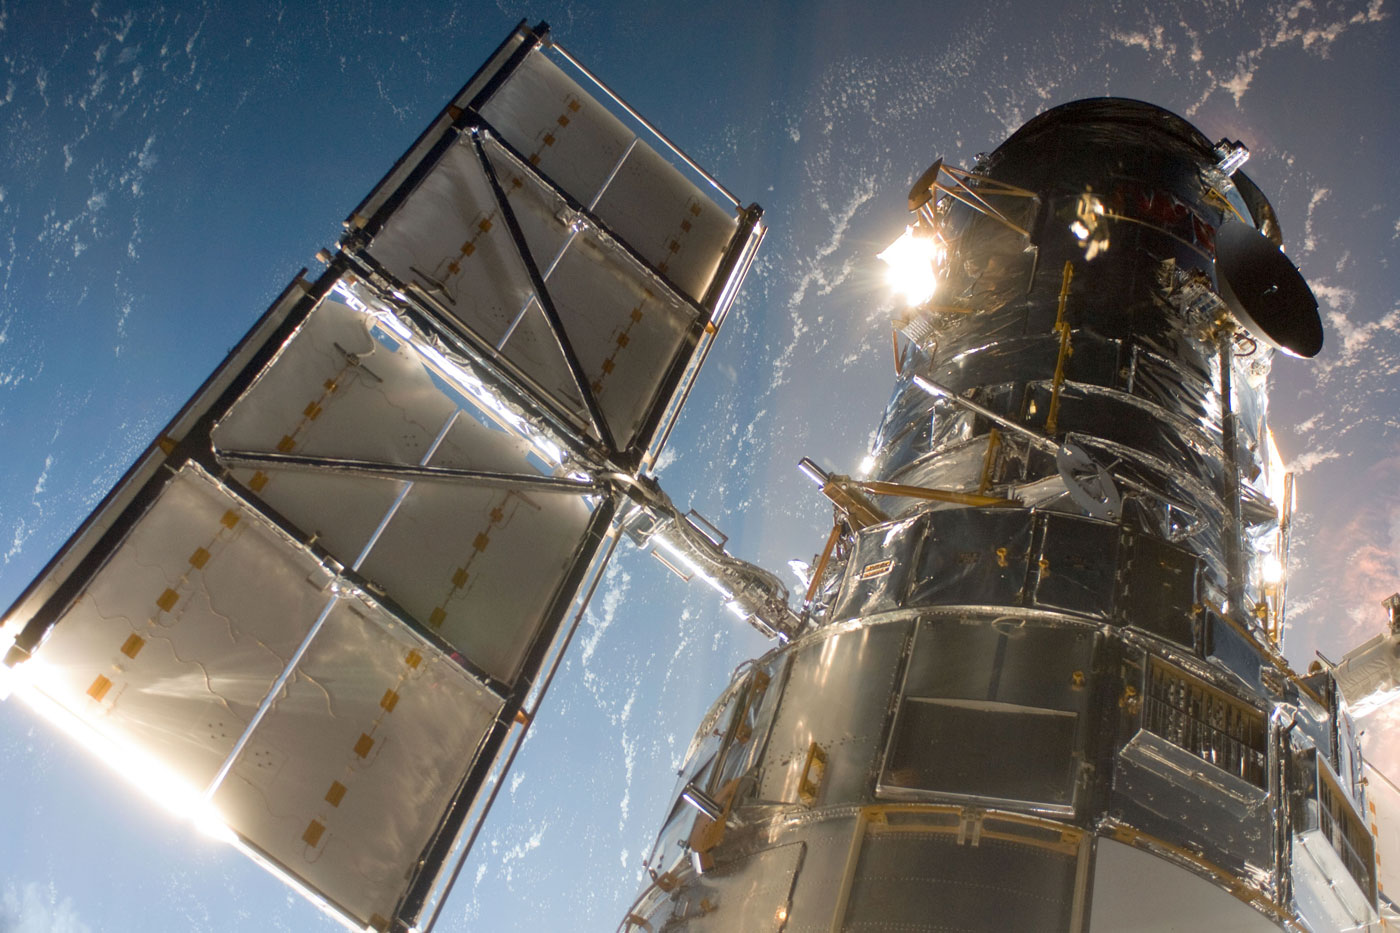 NASA tasks the Hubble Telescope with five more years of service